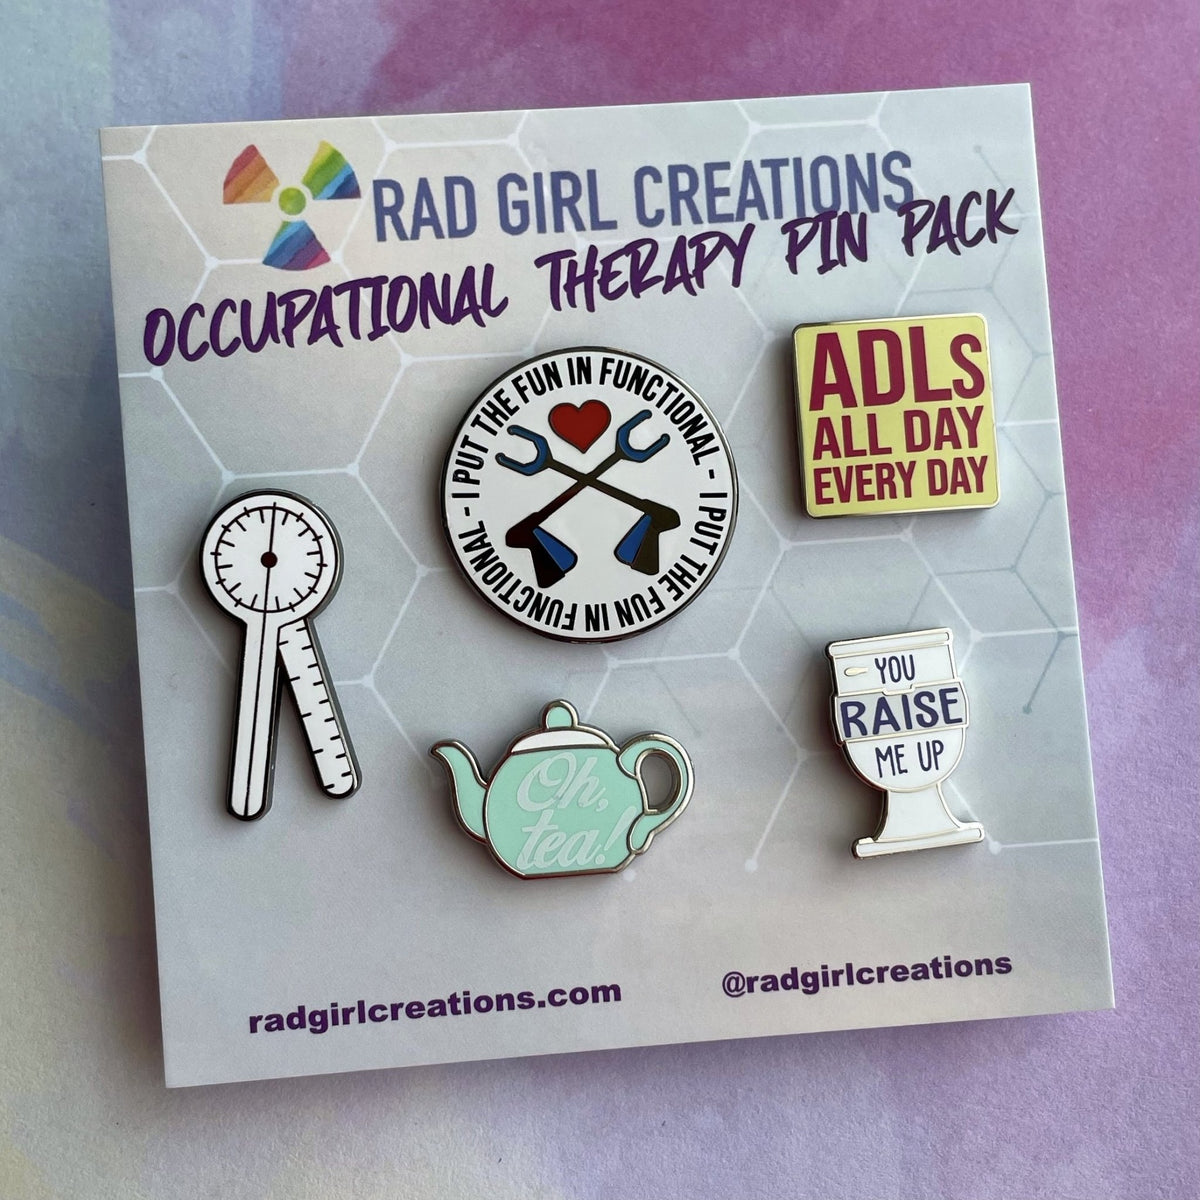 Occupational Therapy Pin Pack - Rad Girl Creations